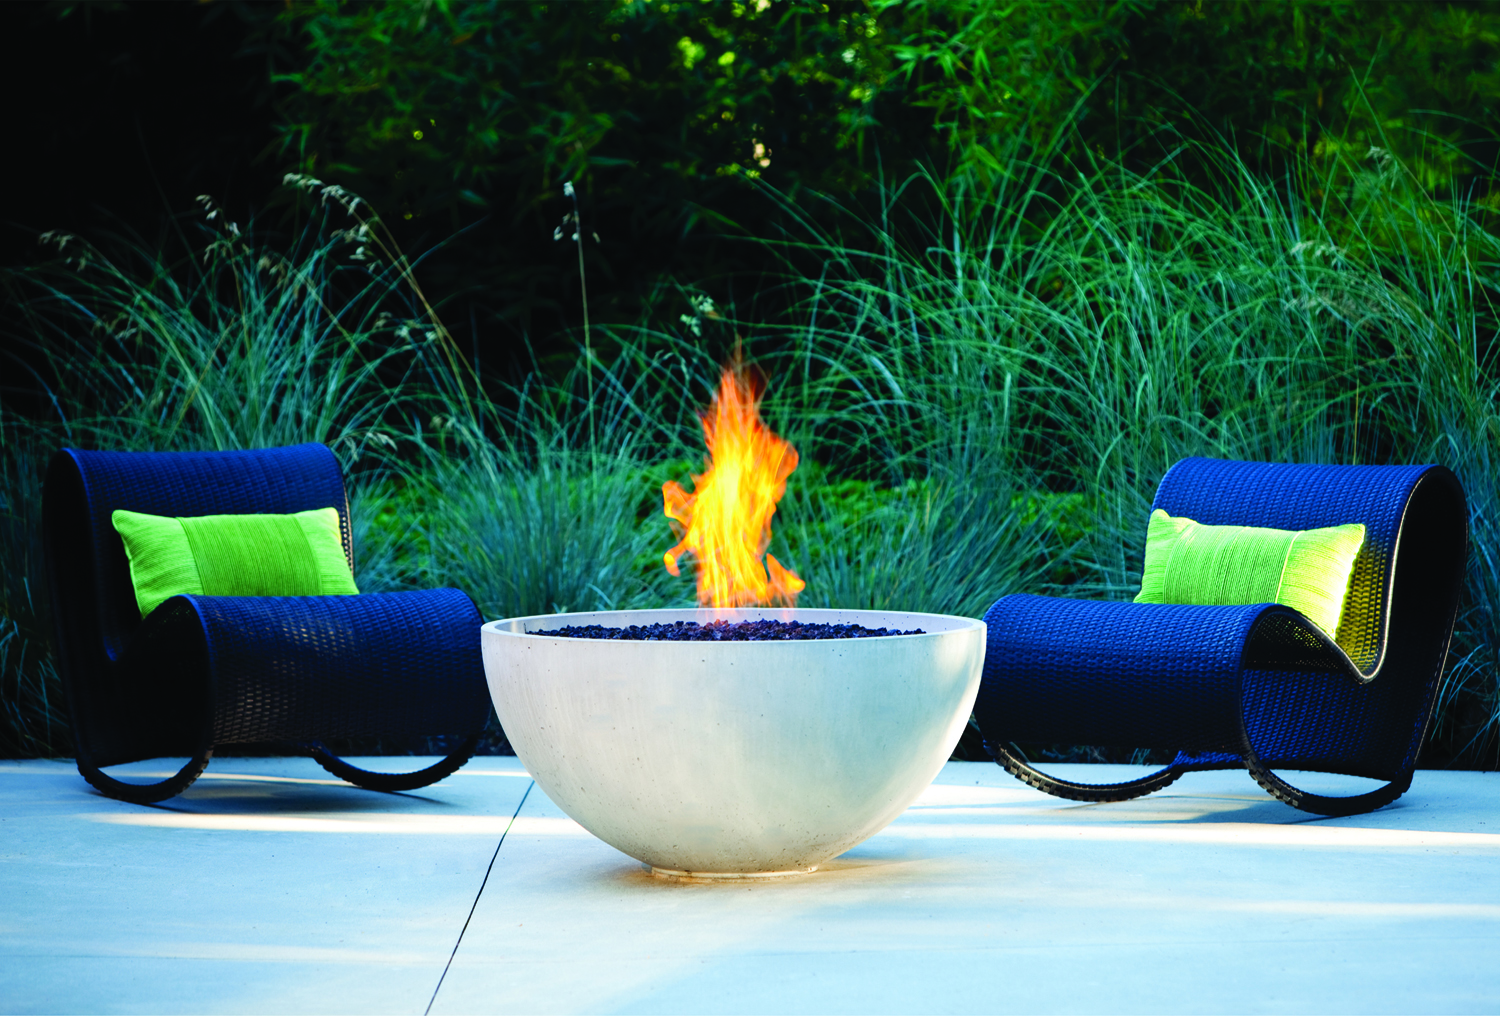 AB8™ Round Outdoor Fireplace Burners - Fireplace Kits